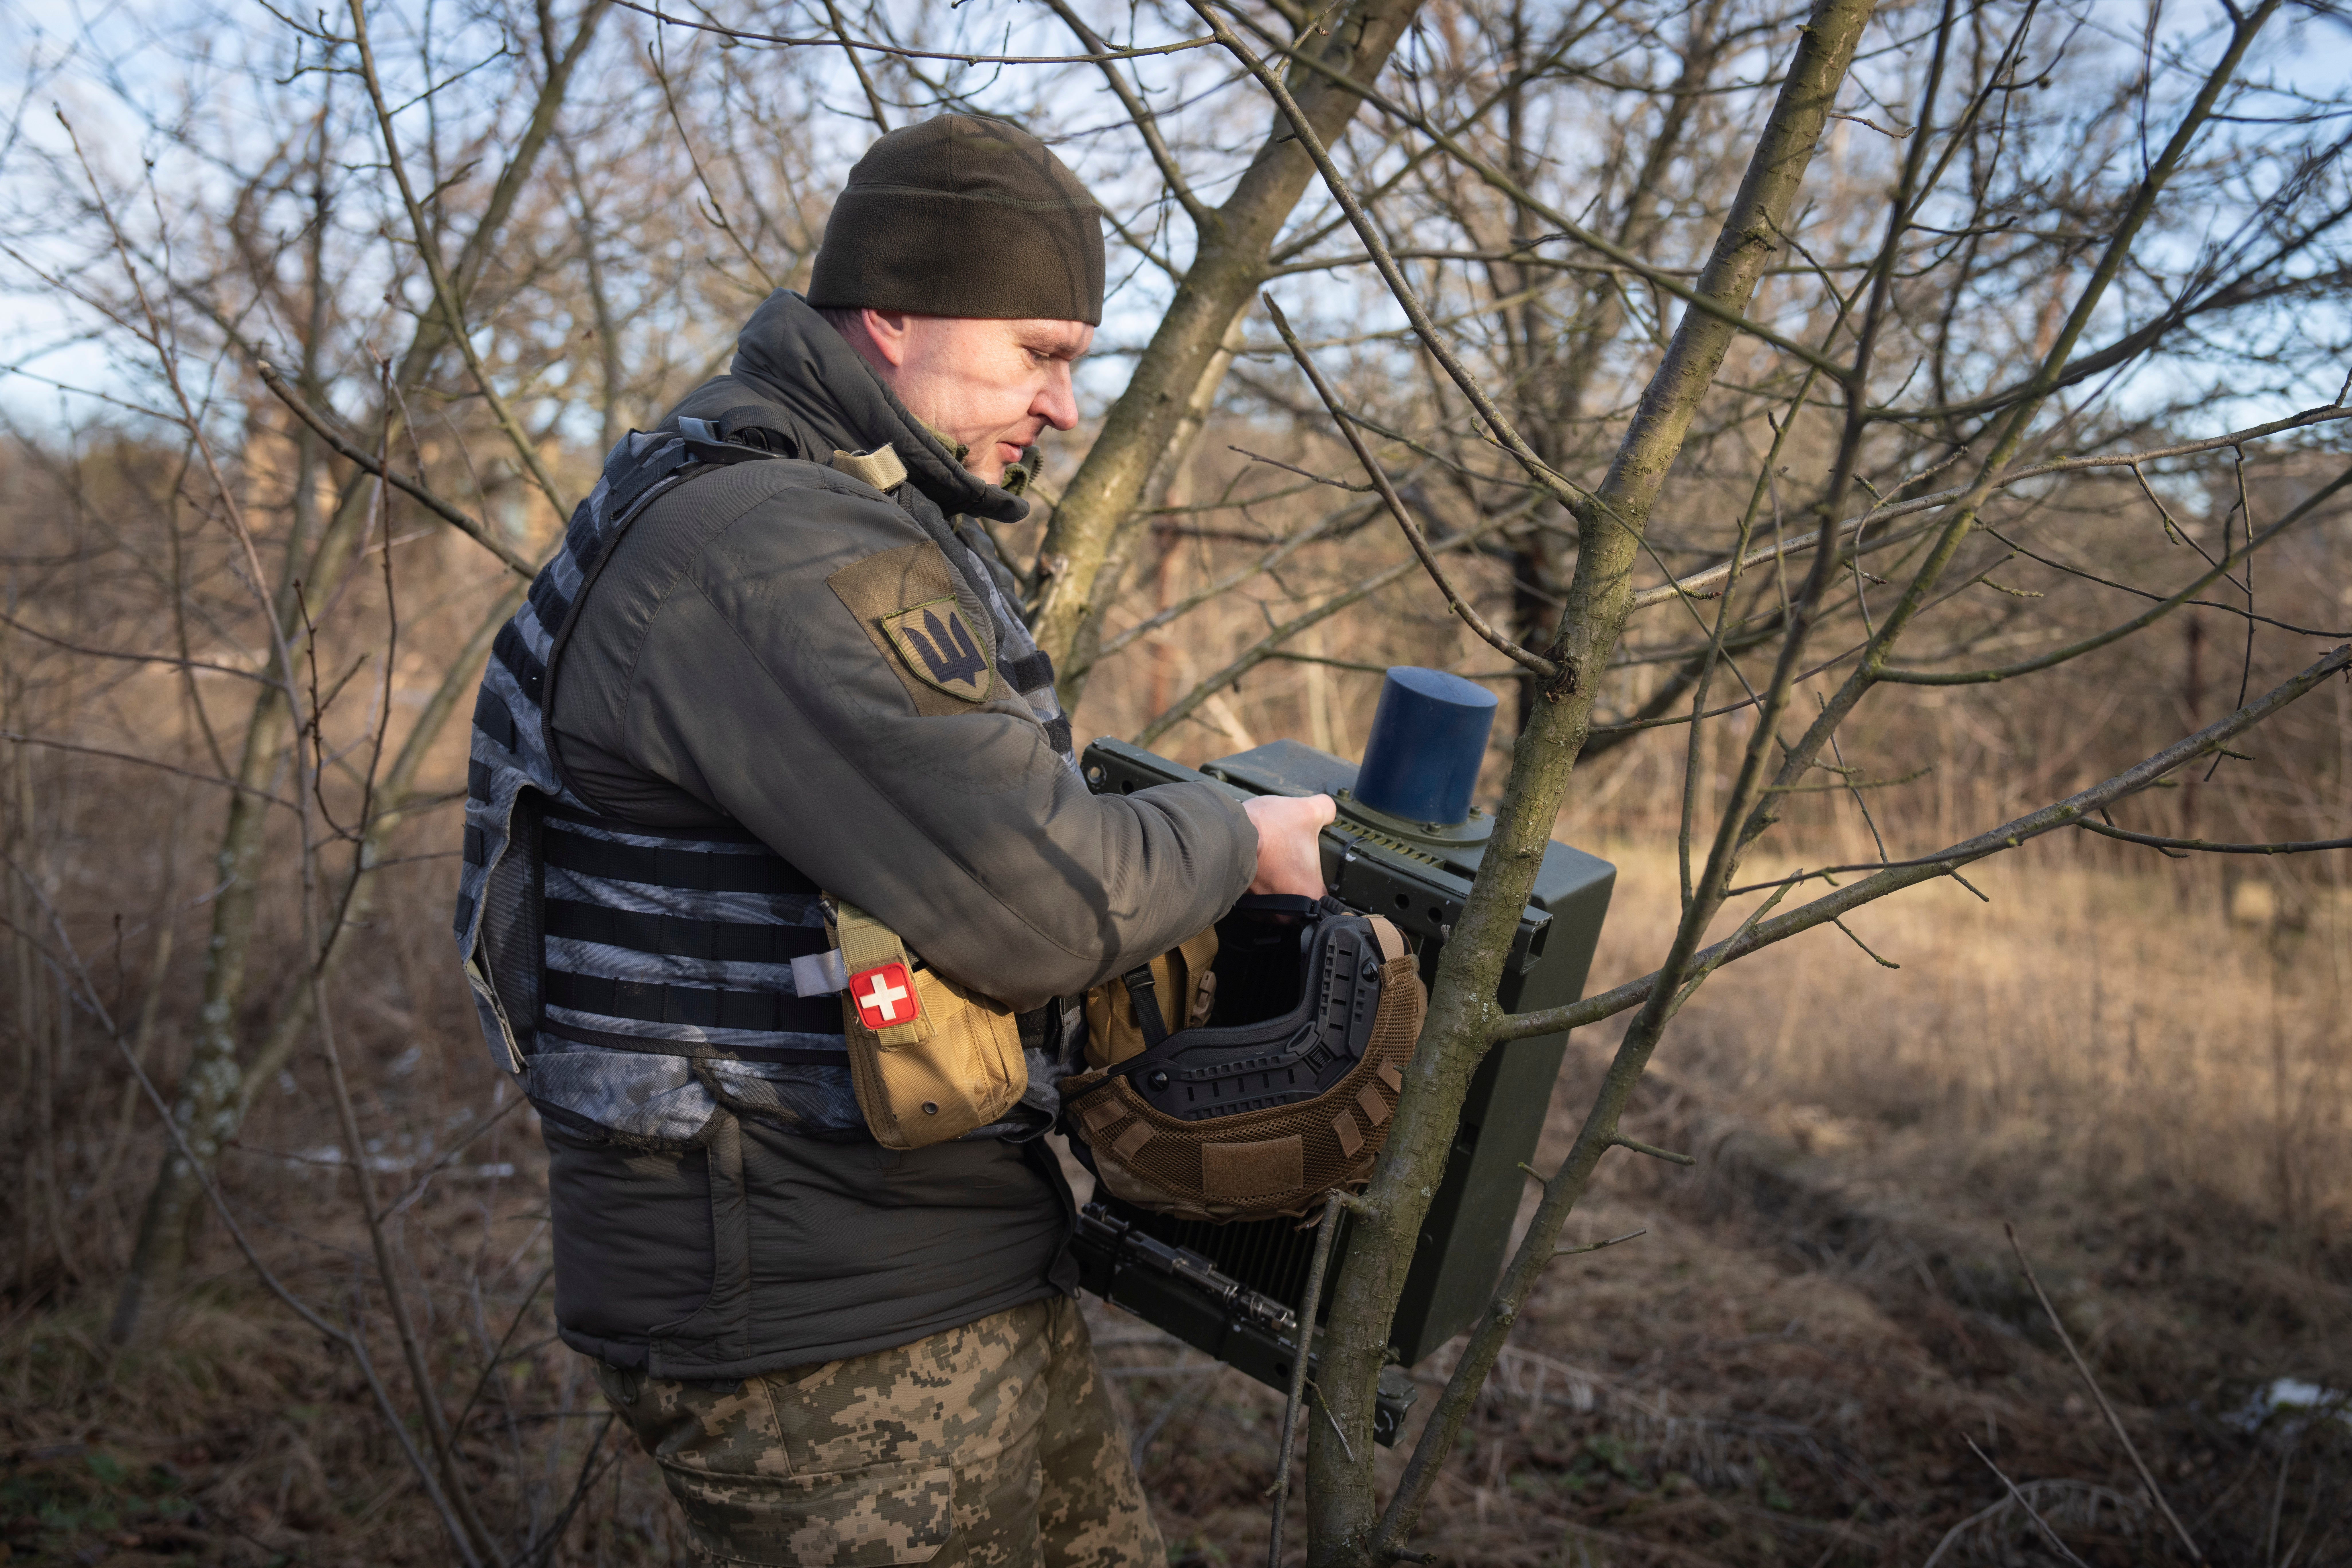 A Ukrainian serviceman installs an electronic warfare system to quell Russian drones at the front line, near Bakhmut